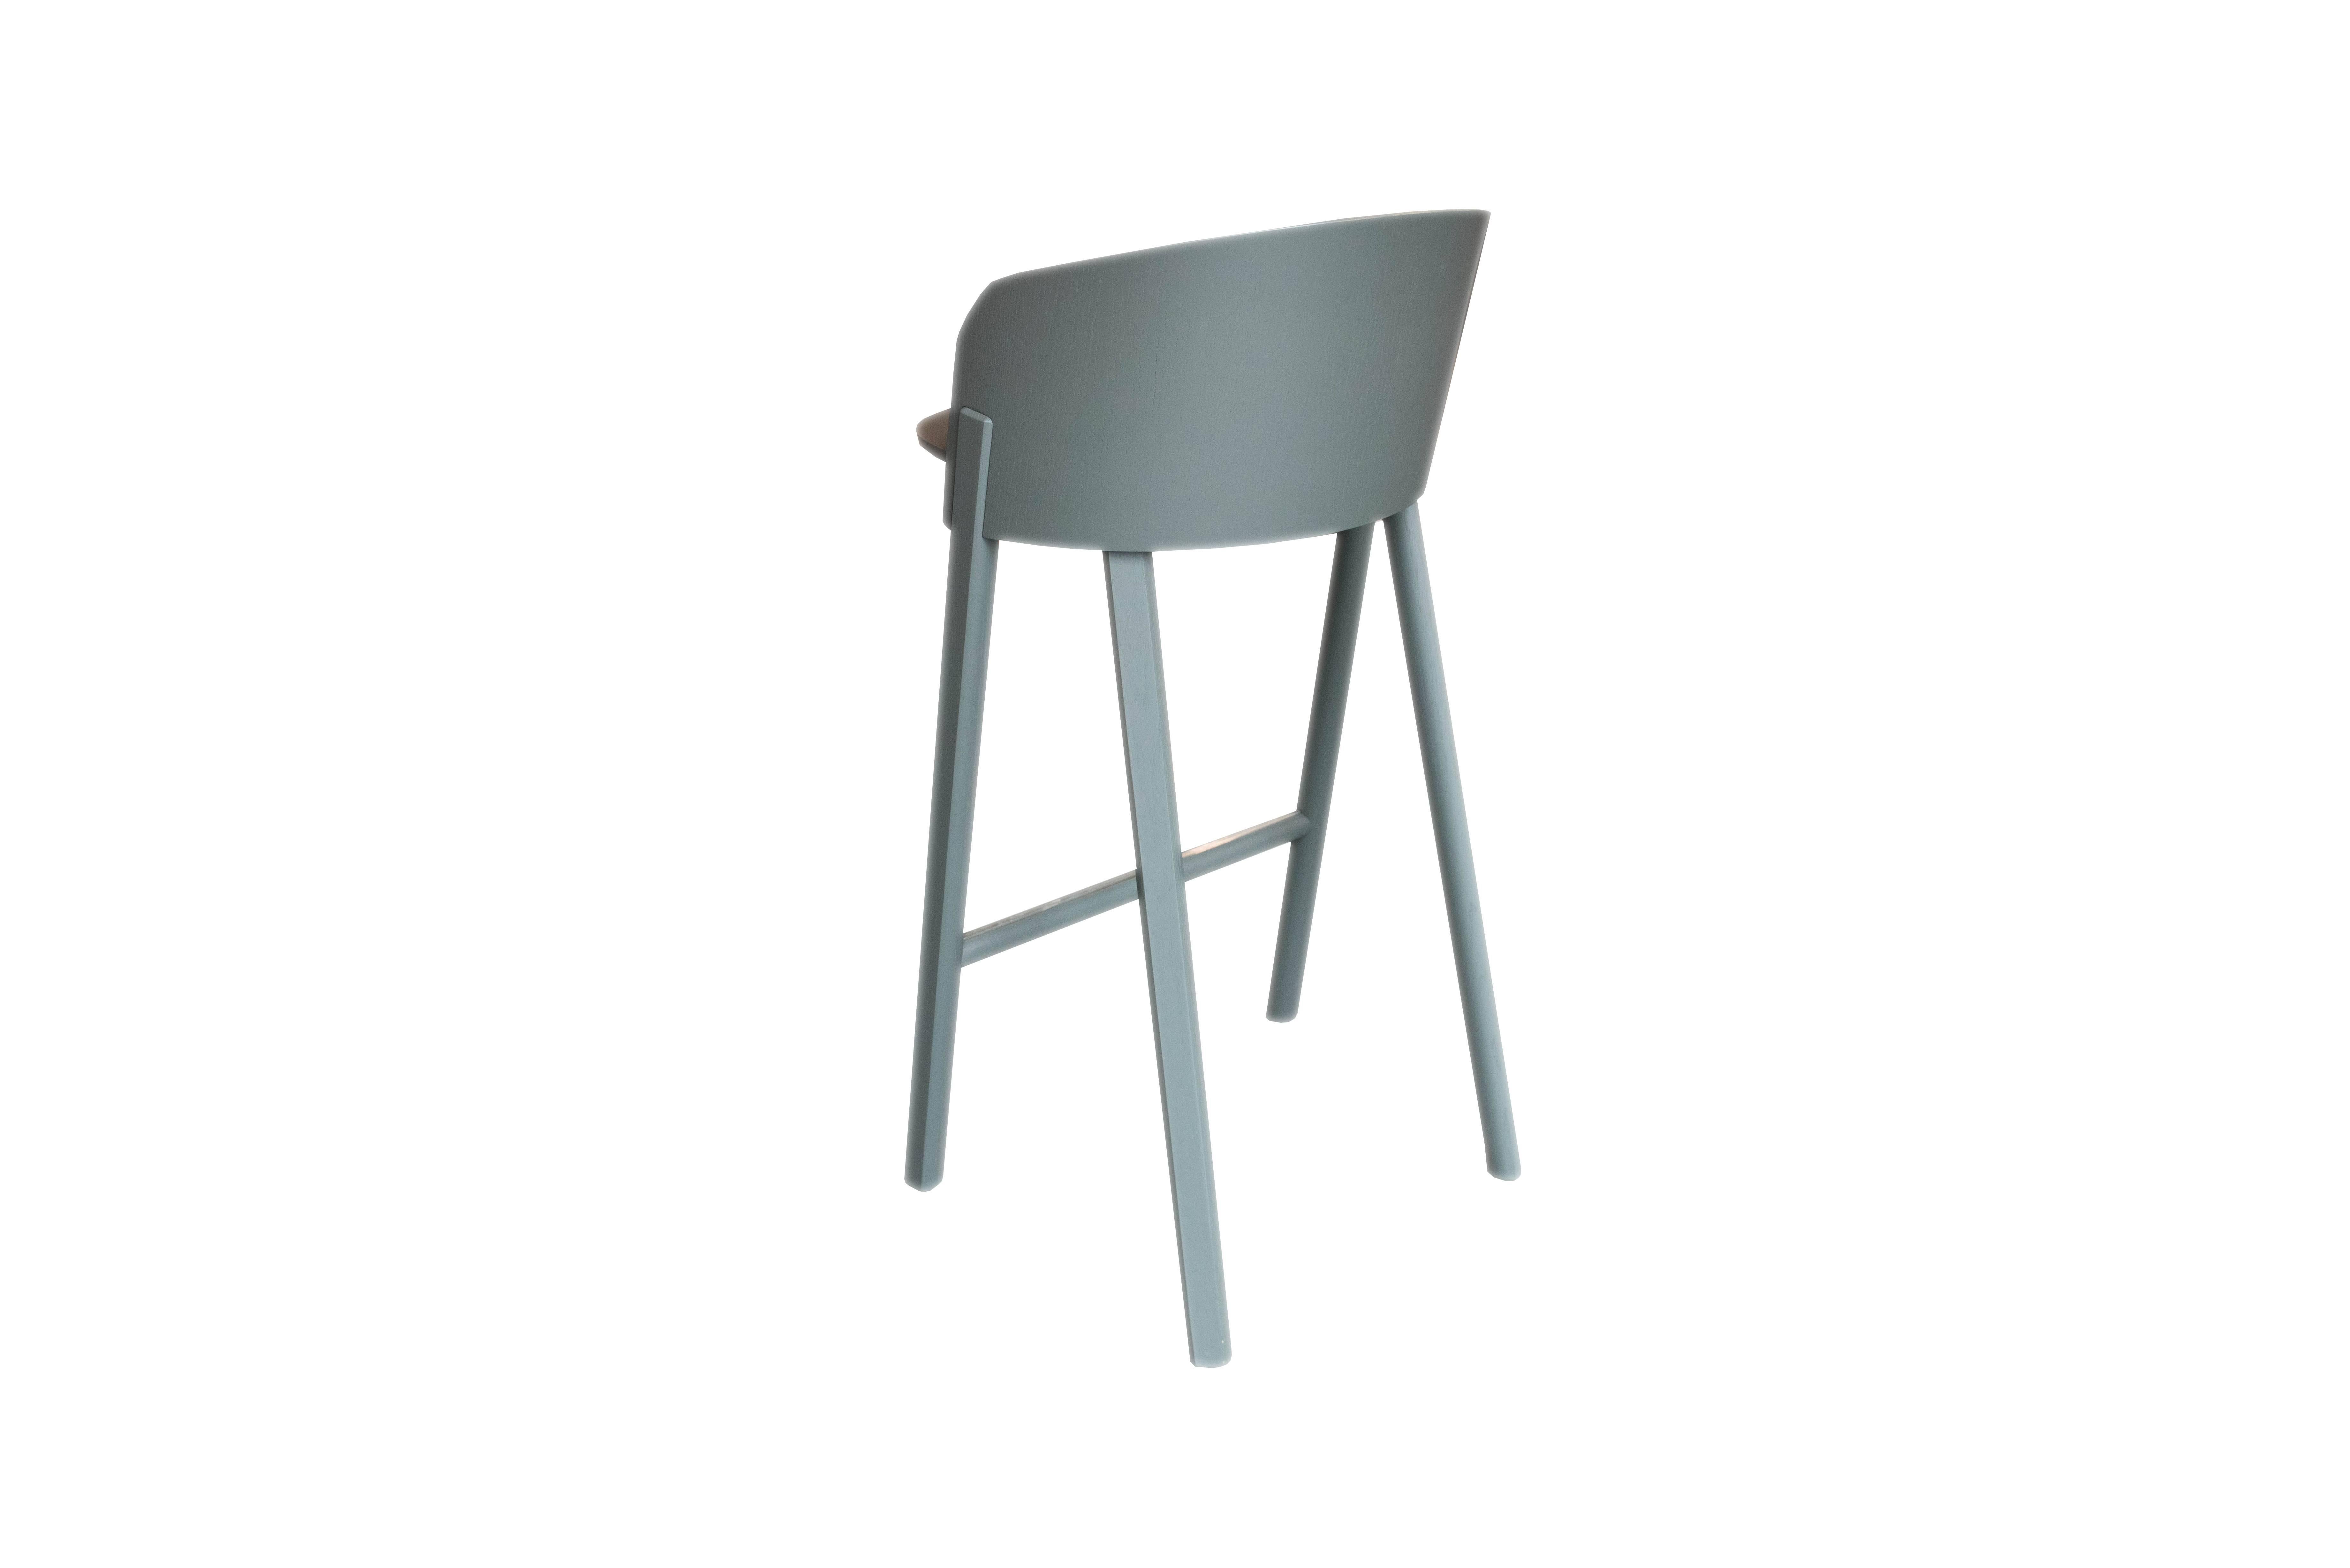 Stool

Design: Stefan Diez, 2013
As part of the innovative seating series by Stefan Diez, the stool Other takes up the dynamic design language of the This That Other seating series to offer distinct comfort and quality. The shaped backrest